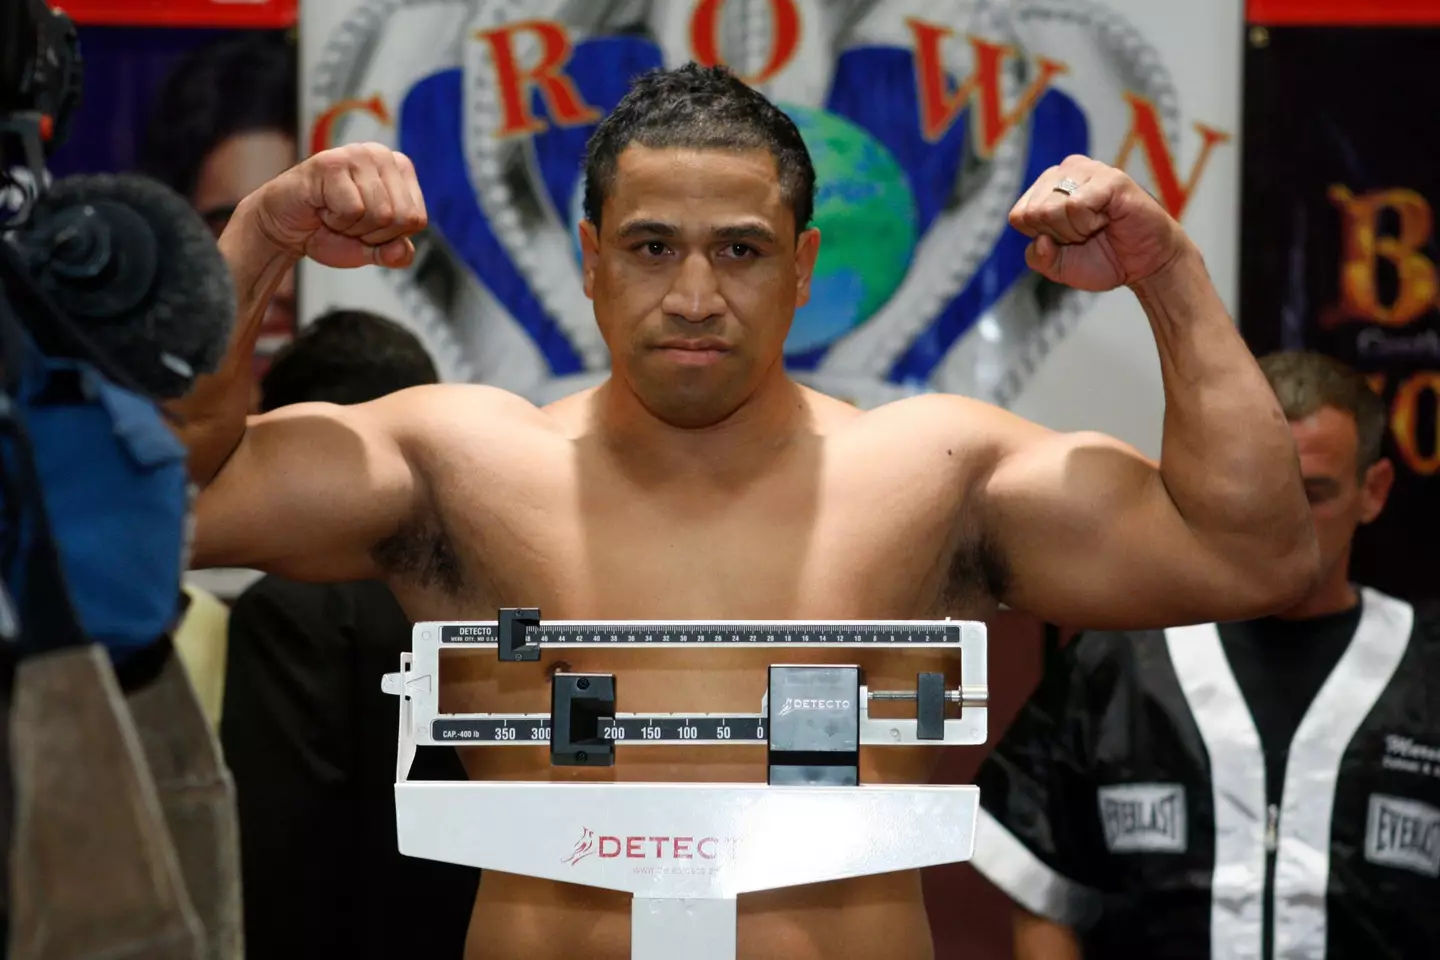 Former professional rugby league player and boxer John Hopoate reveals he smacks his kids.